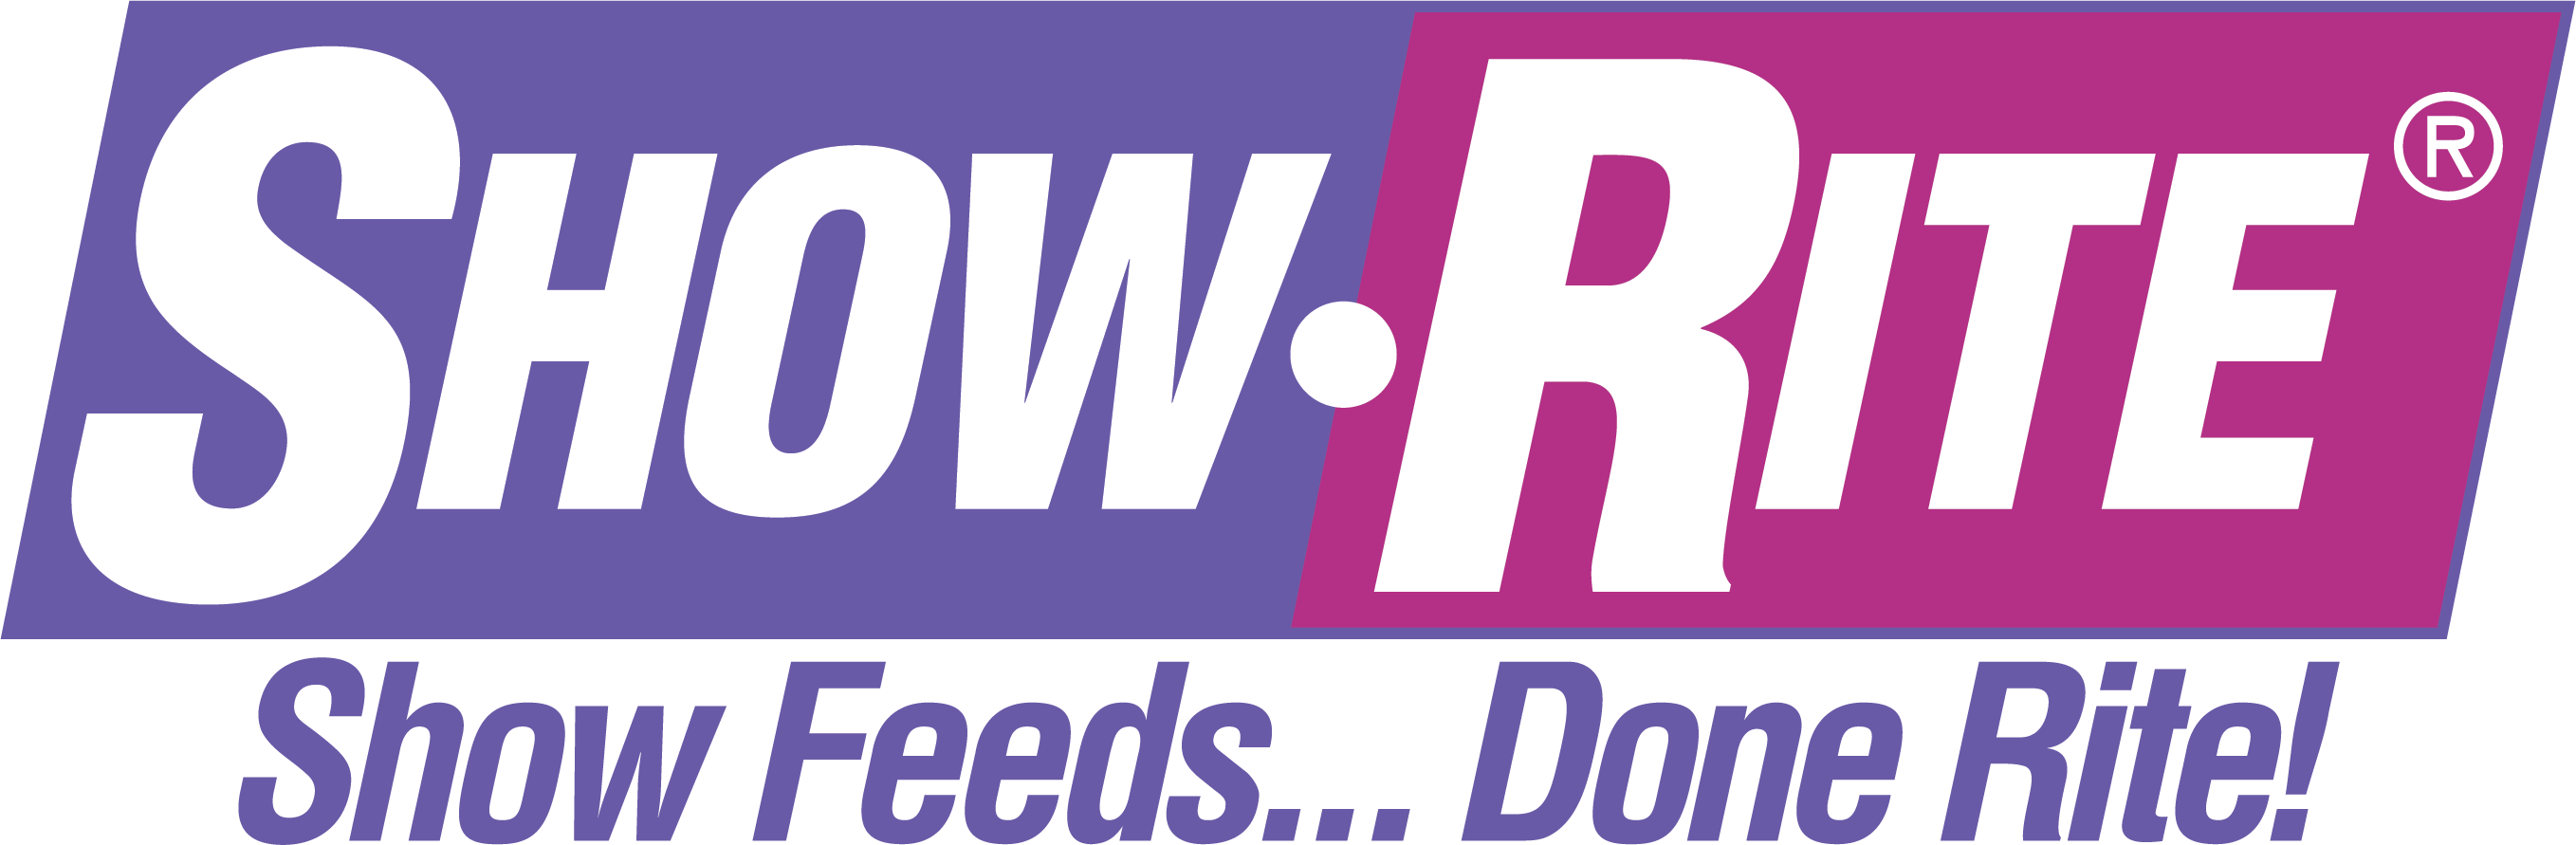 ShowRite Logo - NEW.PNG